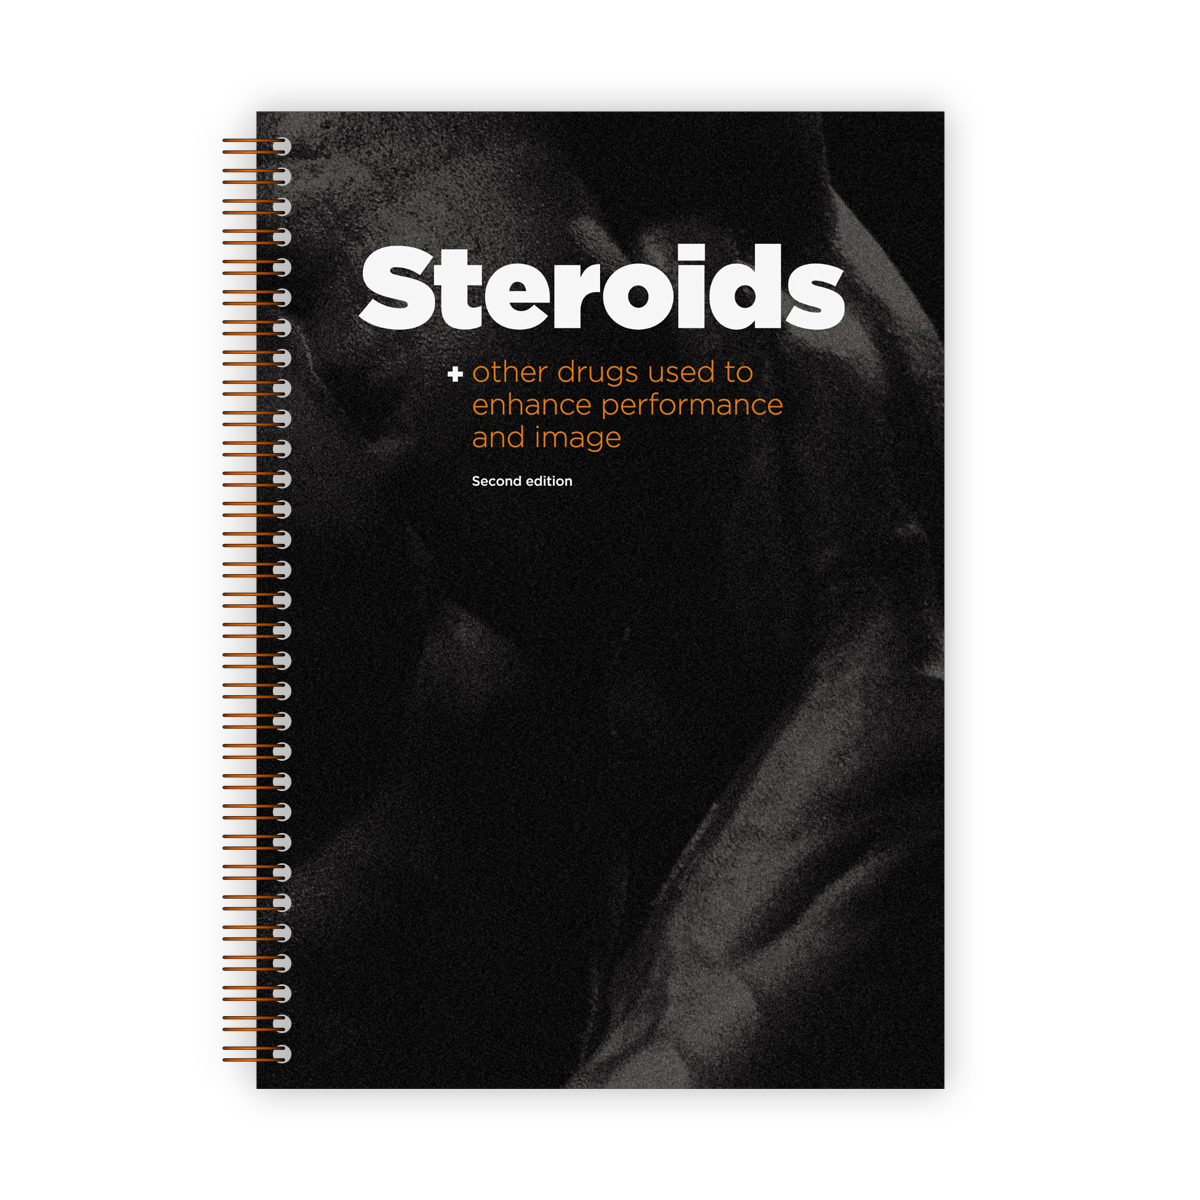 Guide to steroids (and other drugs) 2nd edition 